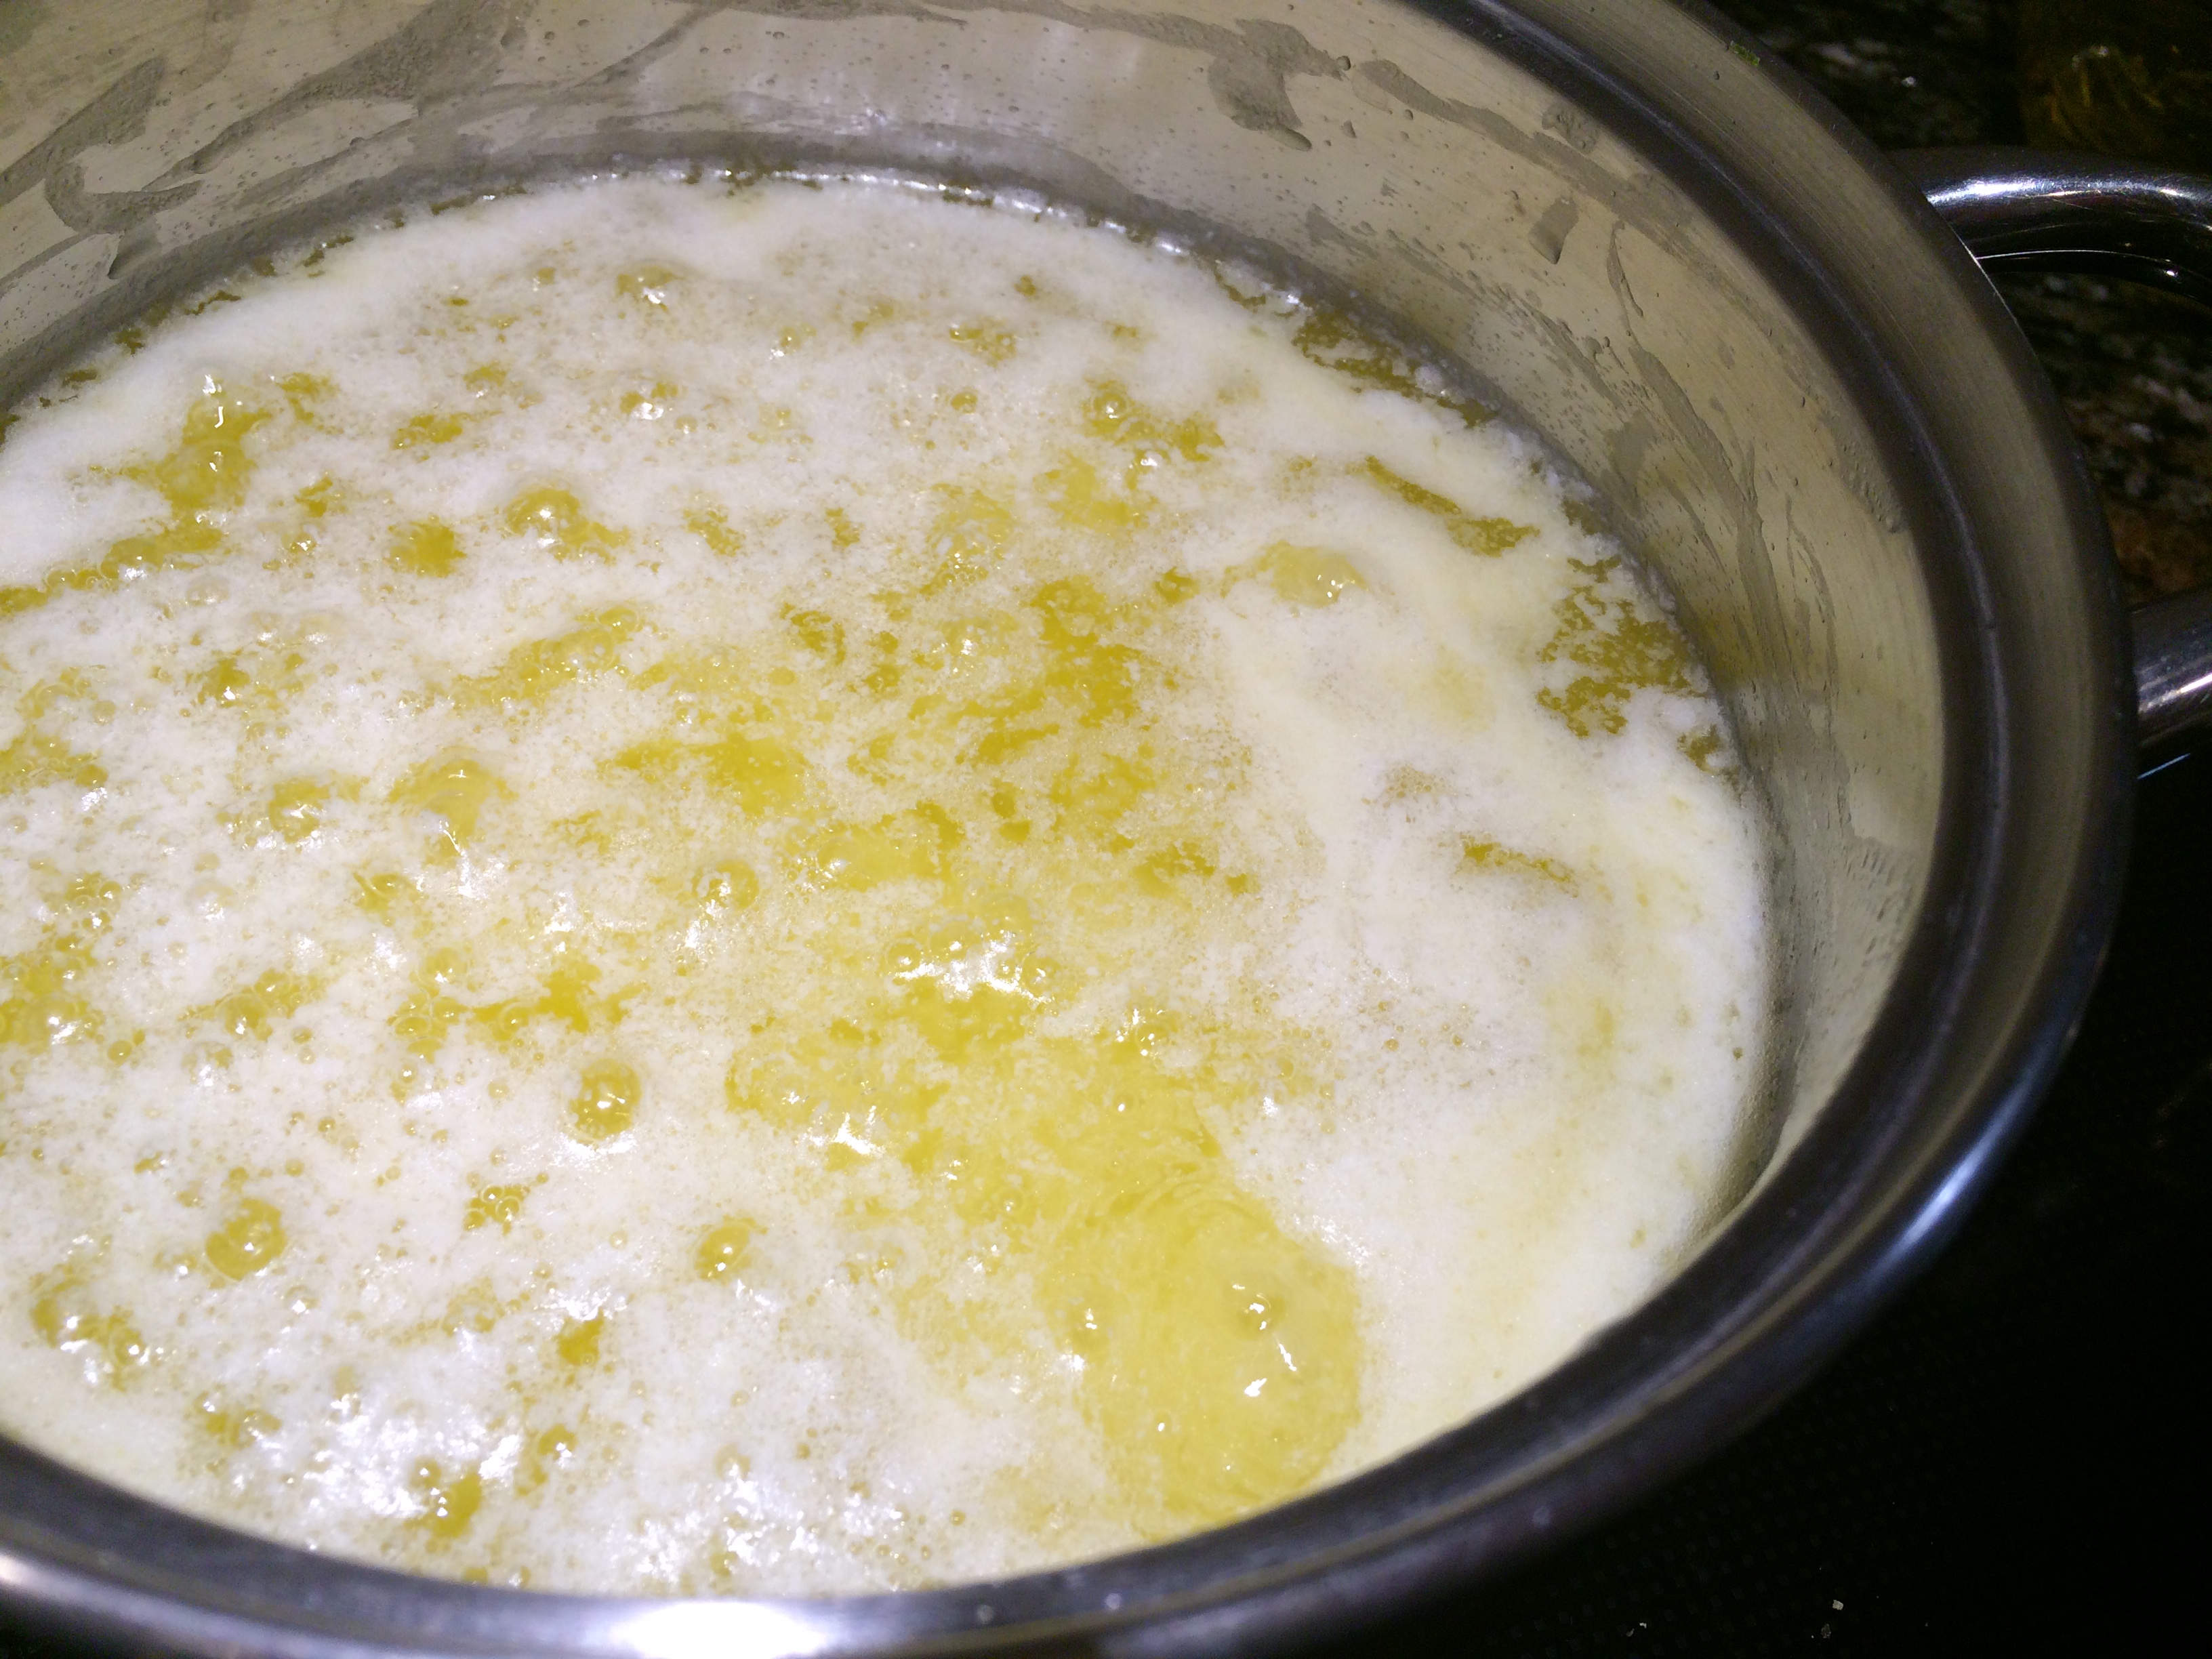 Curds and whey being separated in a pot